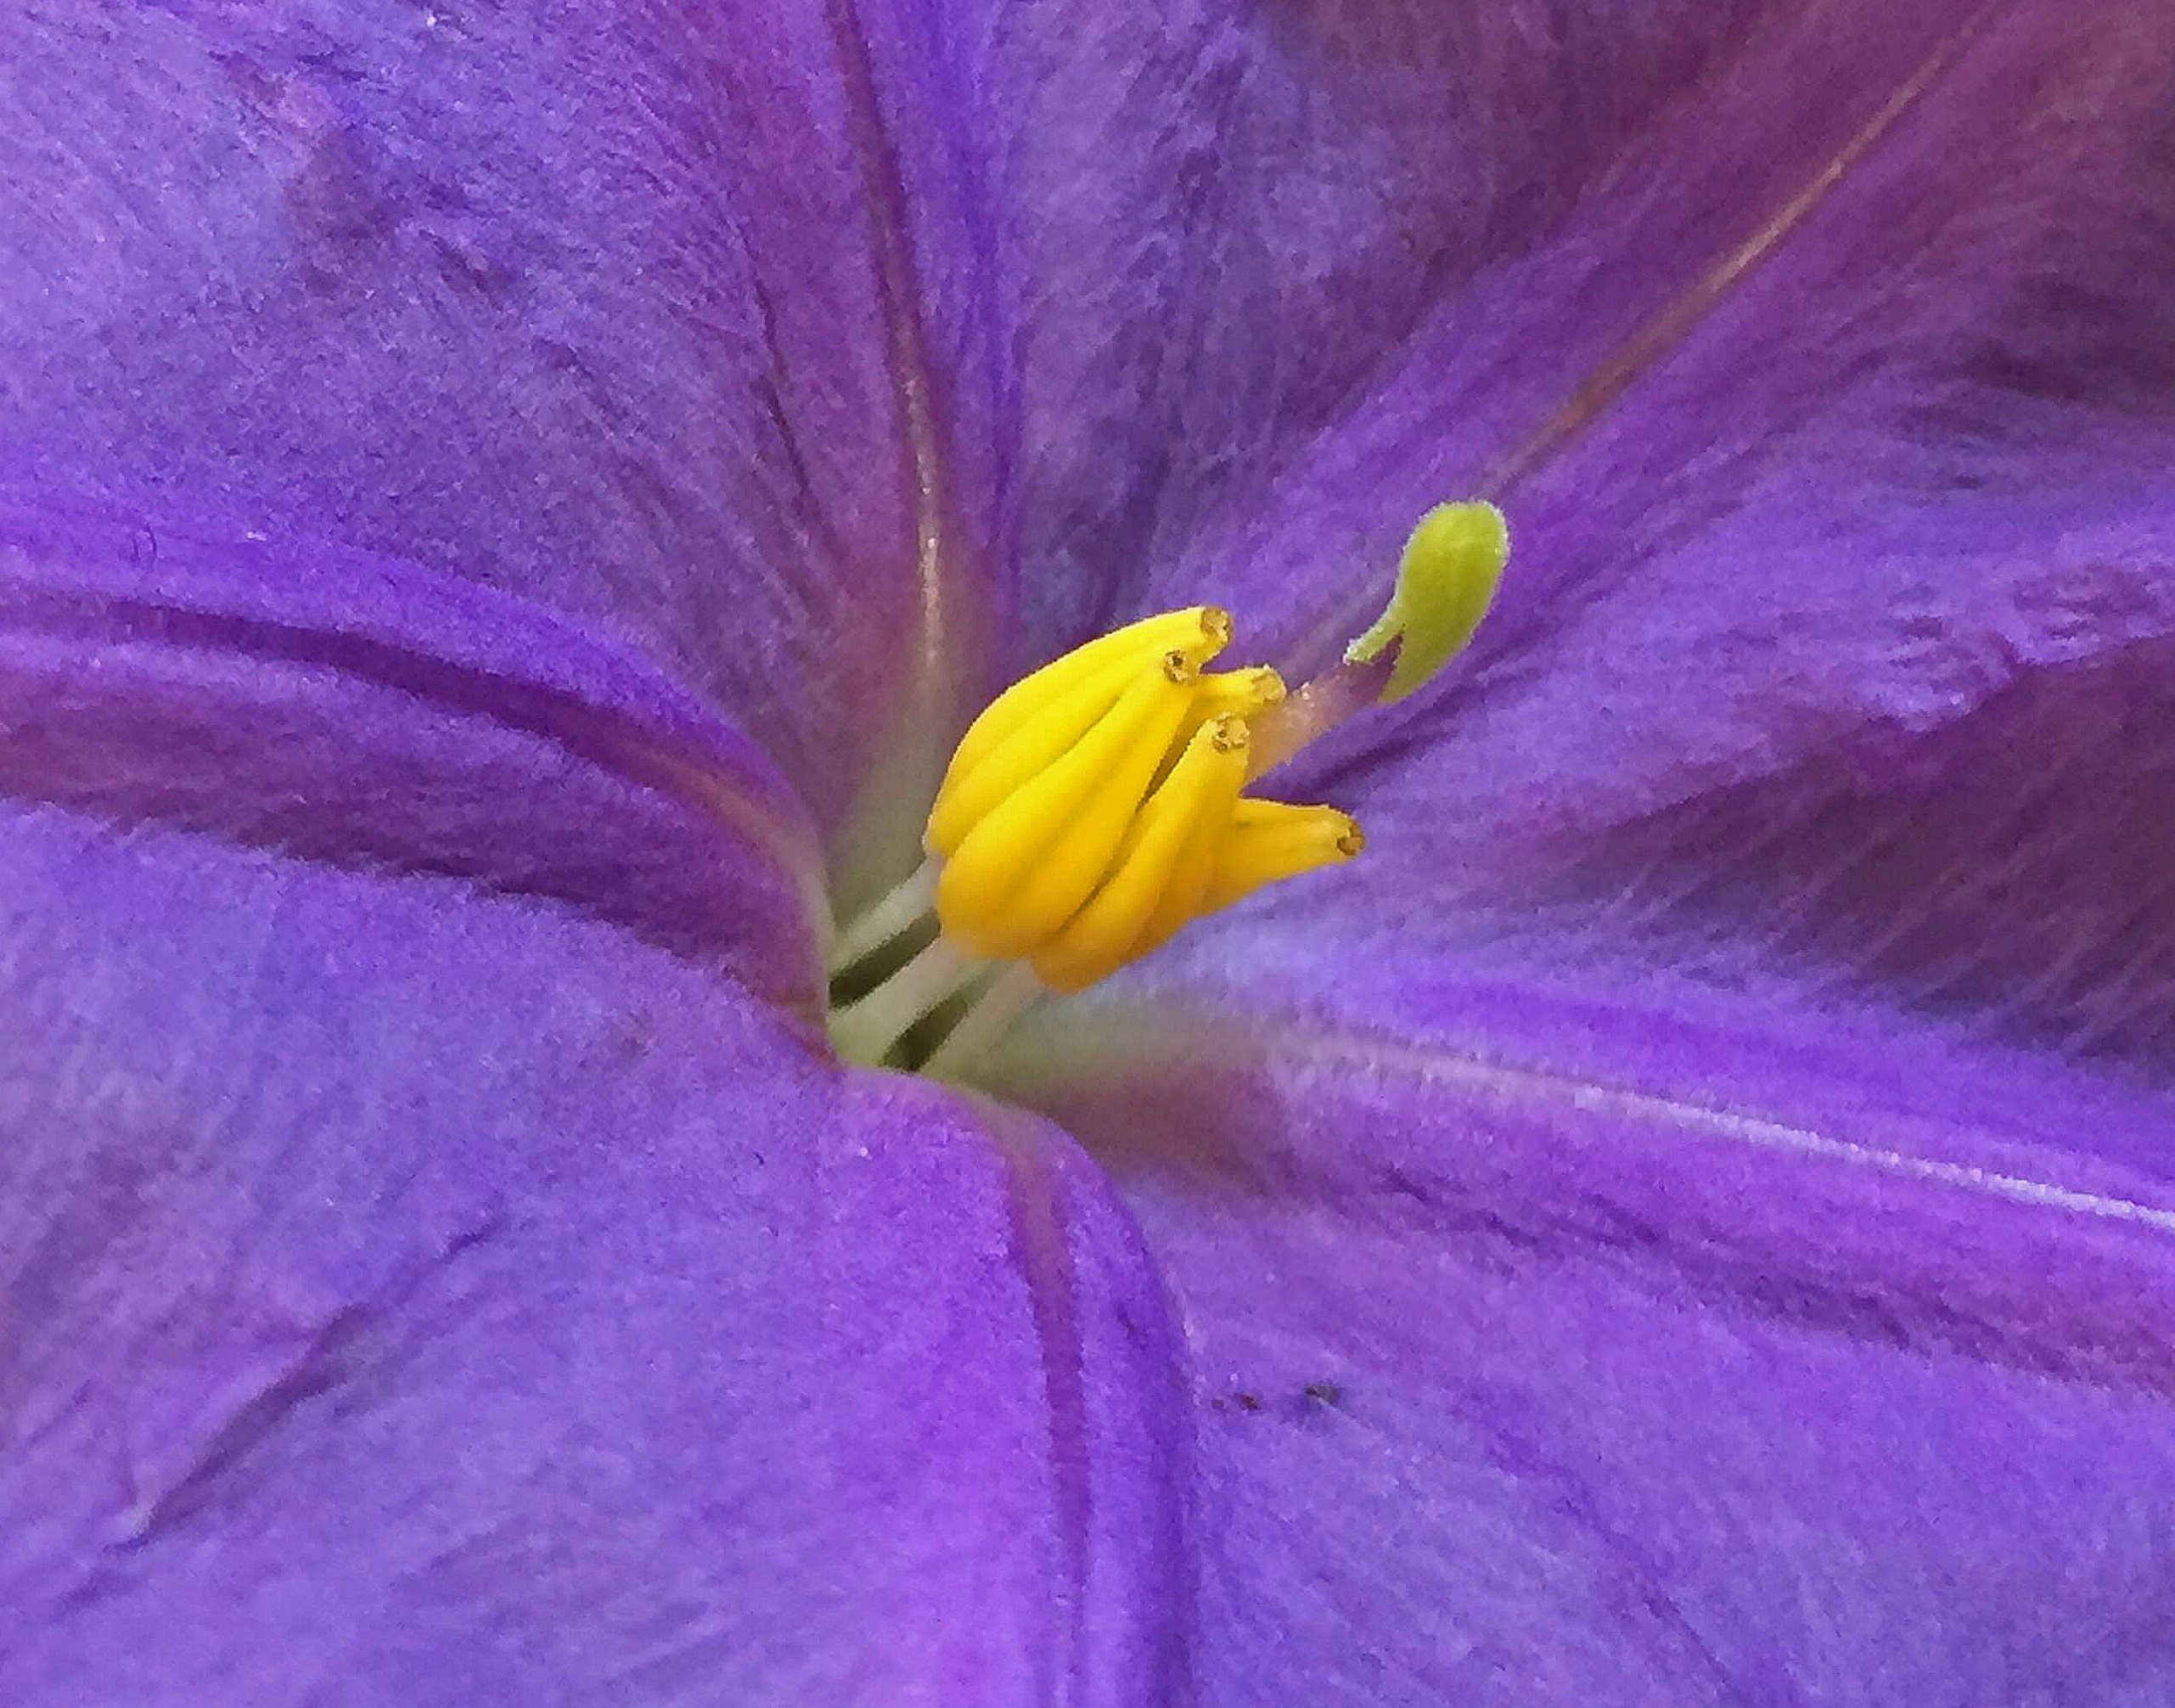 Close-up of Solanum ossicruentum female flower with anthers that produce non-functional pollen. Photo by Jason T. Cantley.